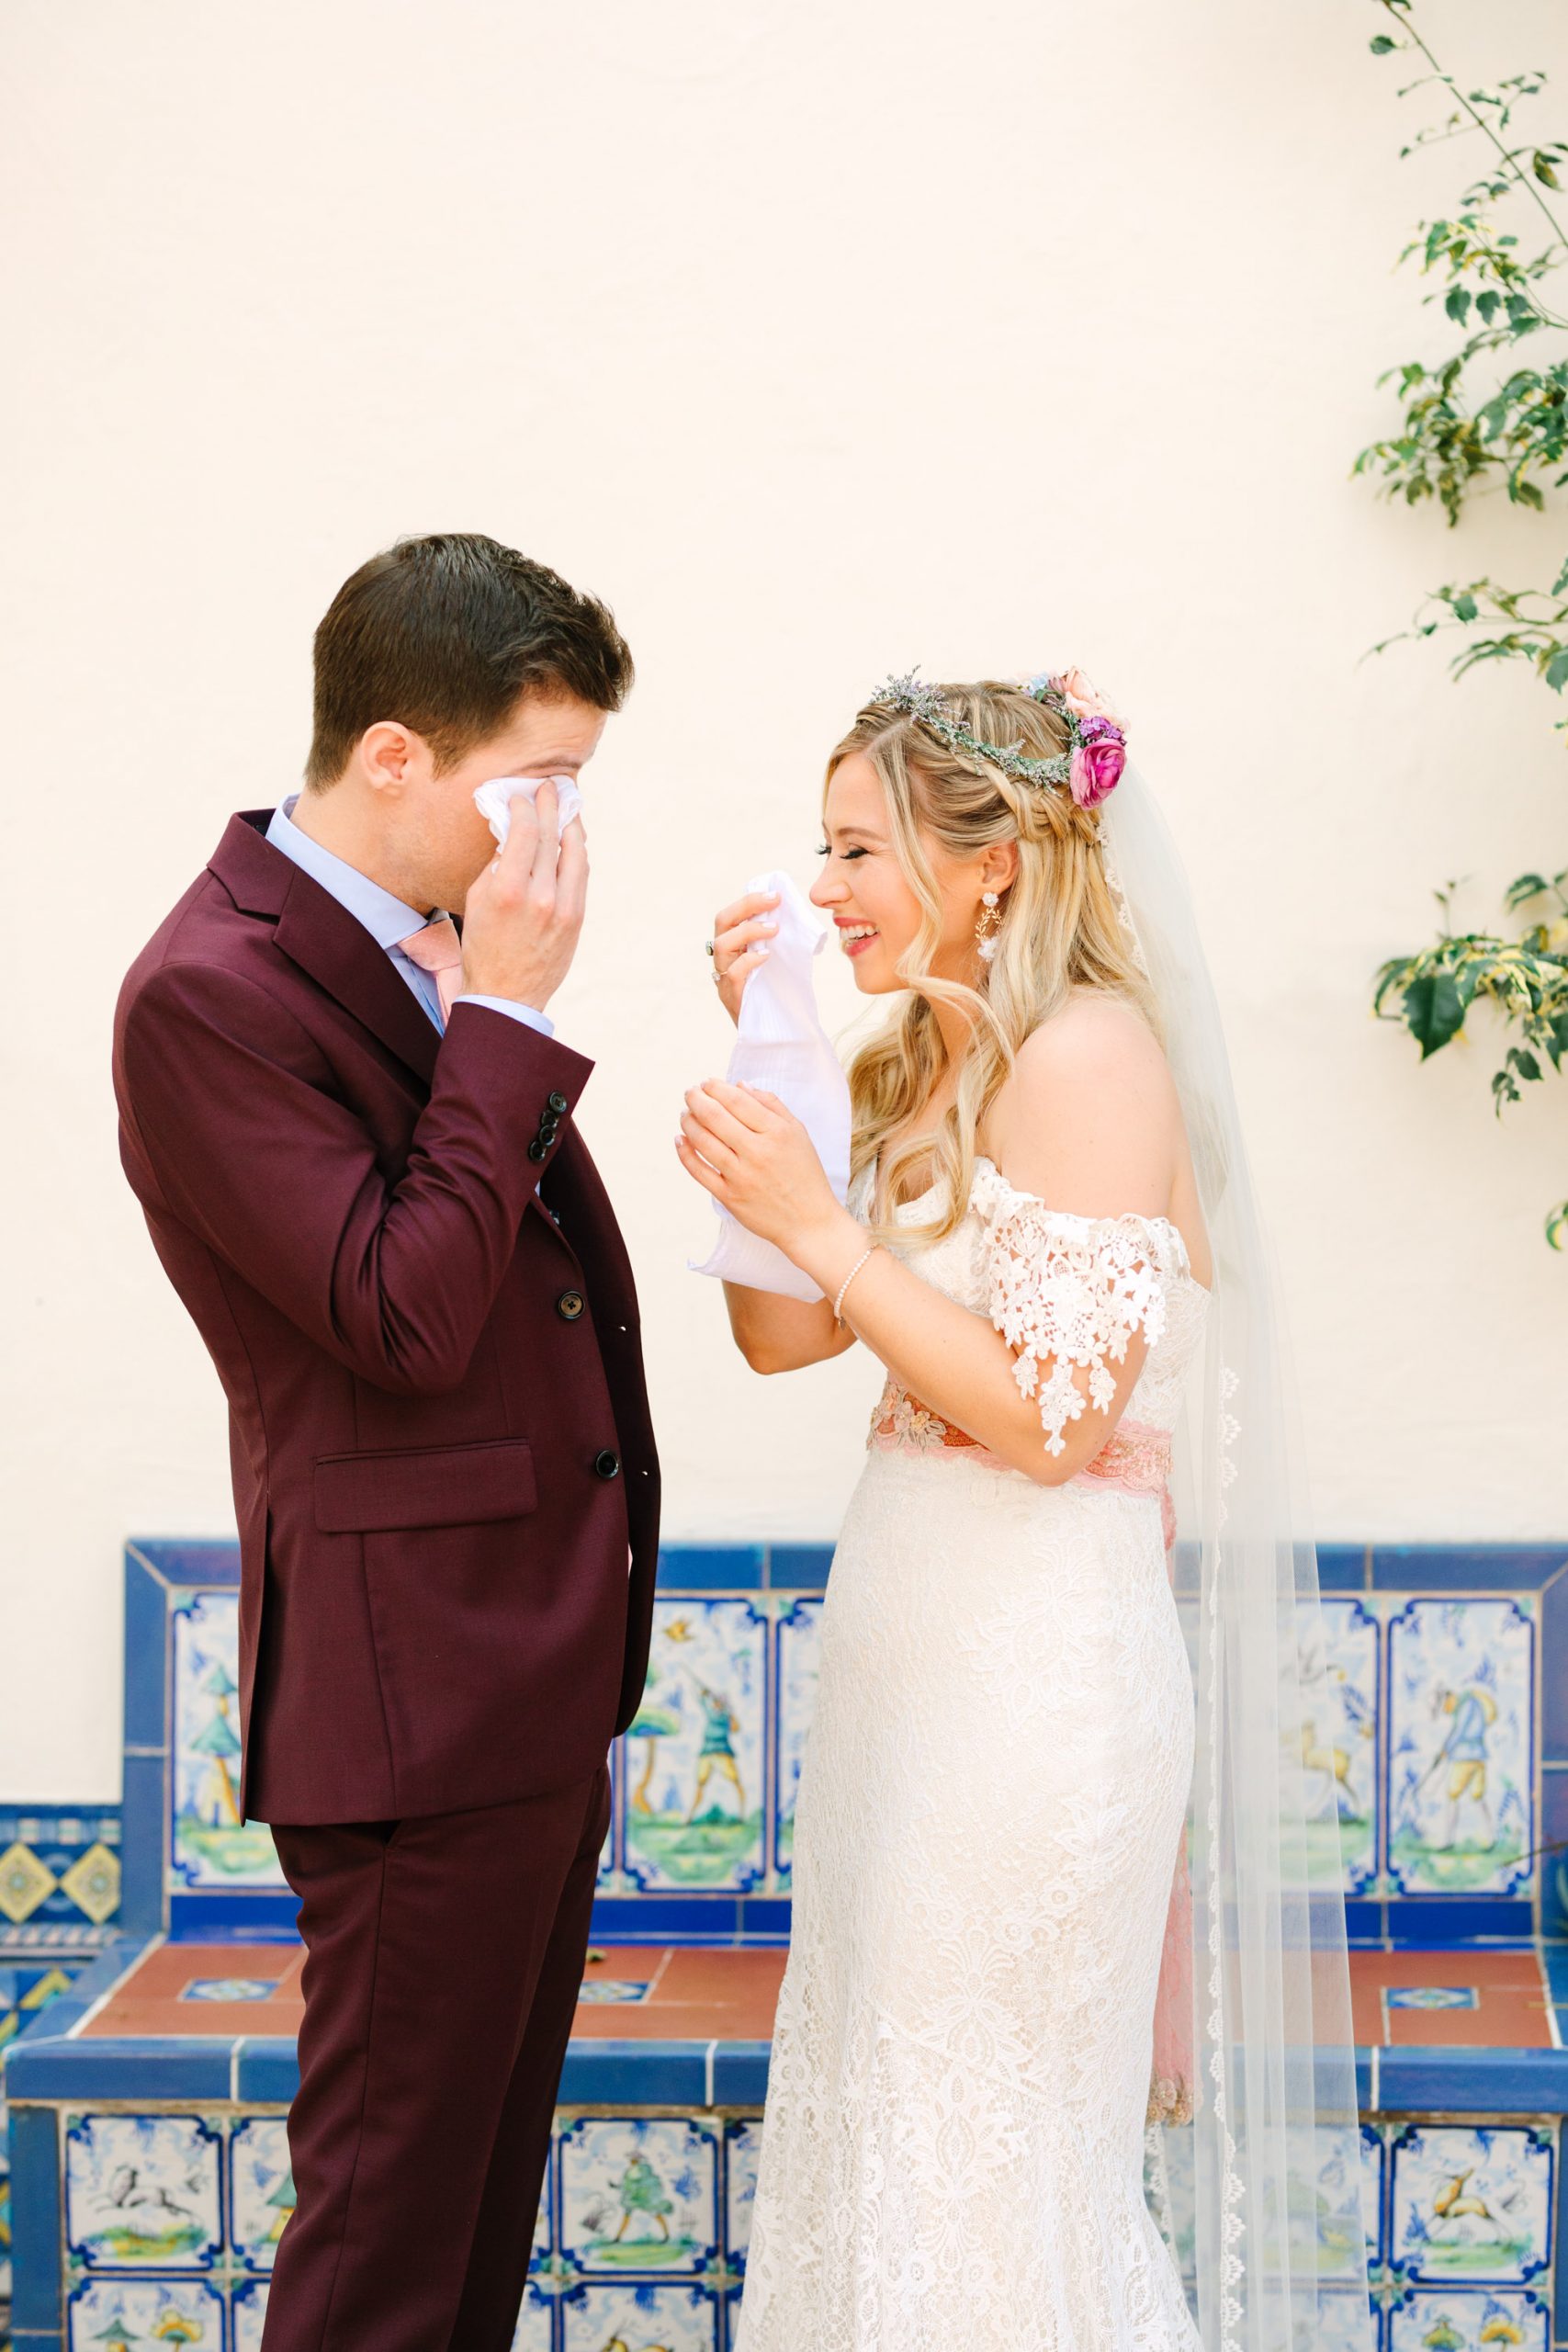 Emotional first look with bride and groom - www.marycostaweddings.com